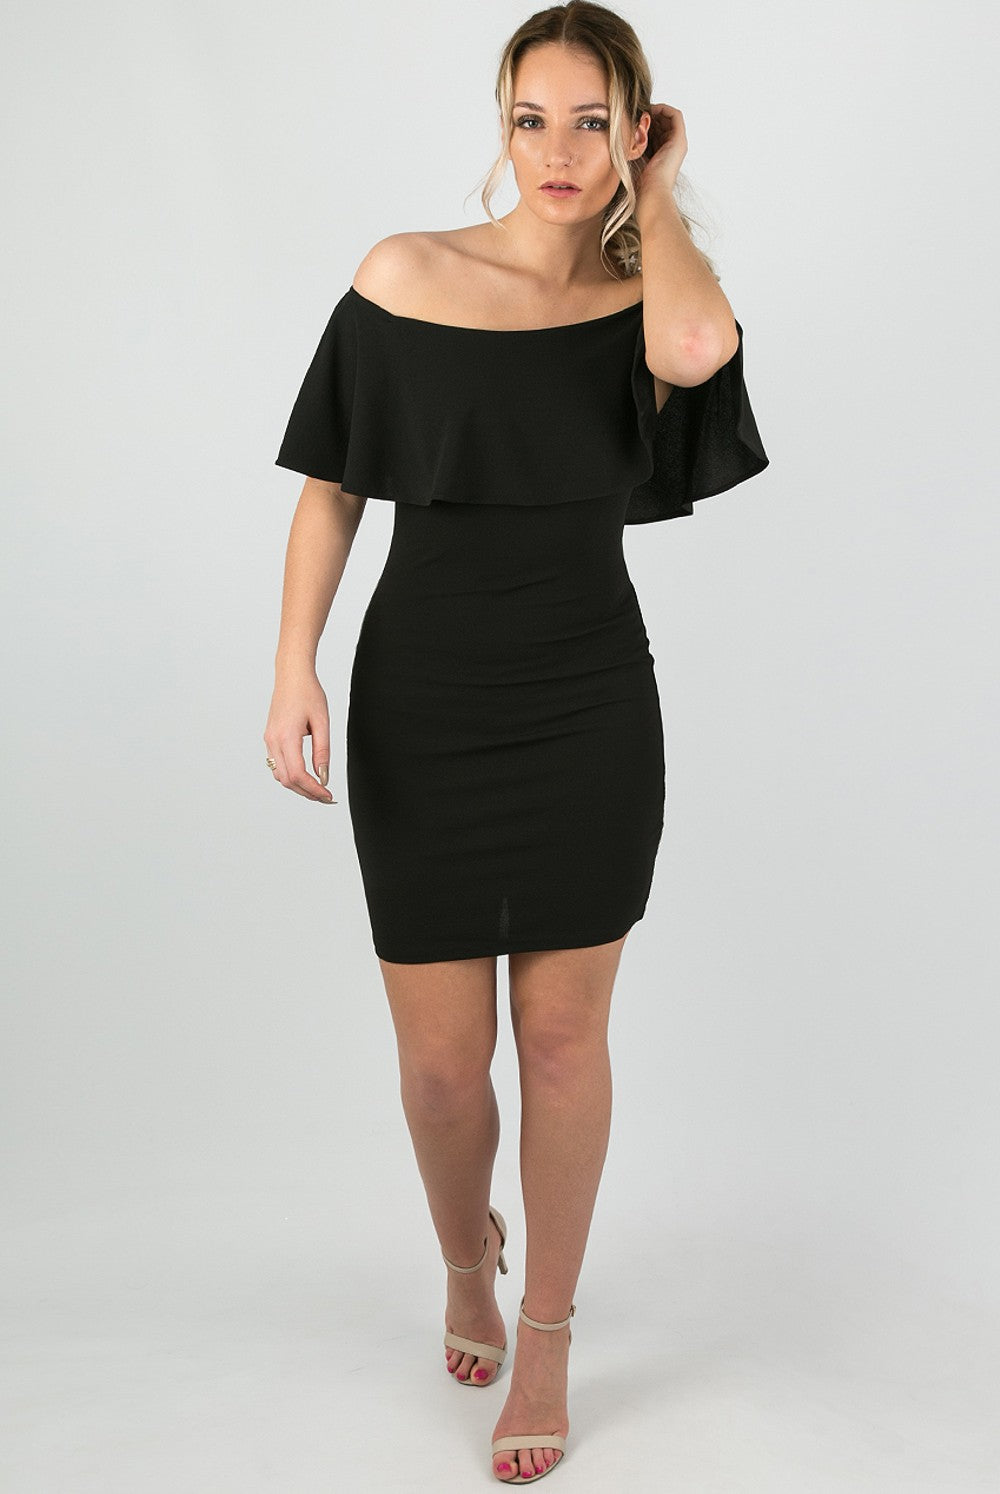 Off The Shoulder Frill Bodycon Dress In Black